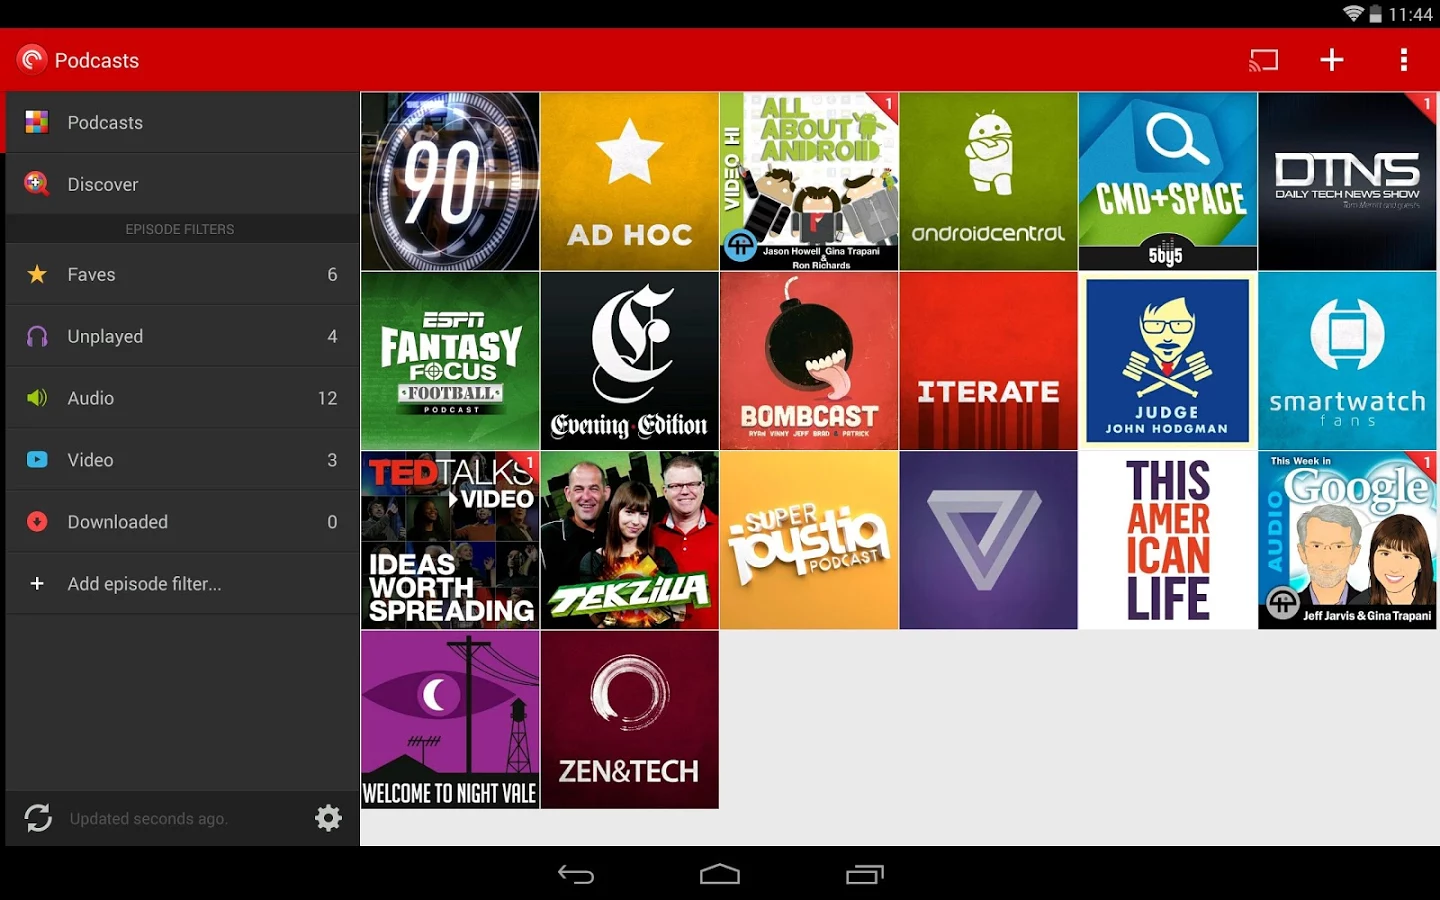 Pocket Casts – Even Podcasts Need to Be Managed